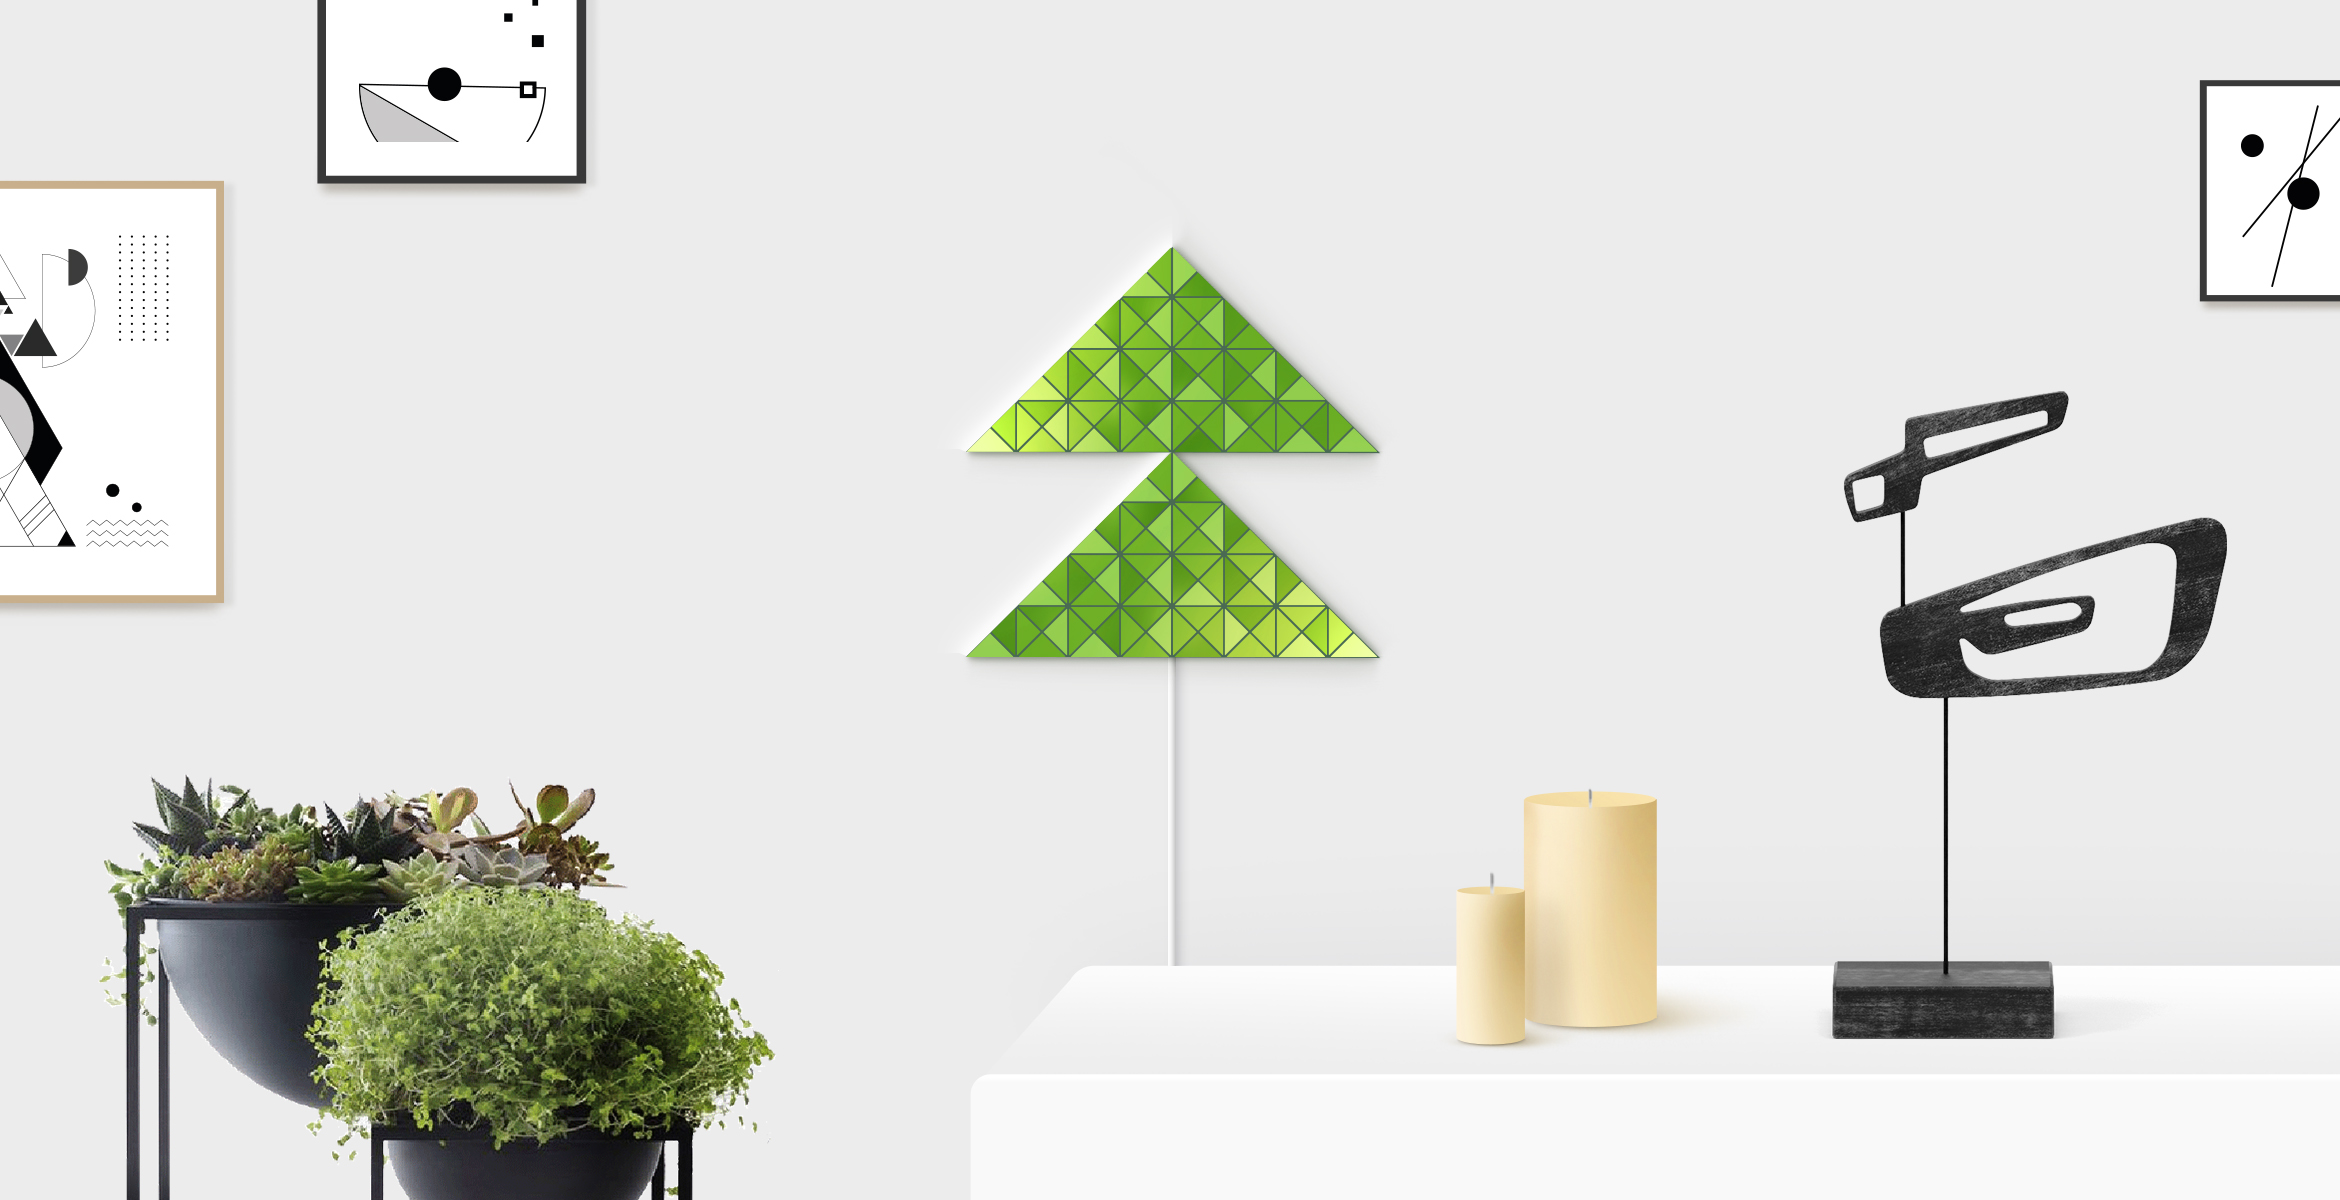 Small fir tree shape in green color, assembled from 2 LaMetric SKY smart light surfaces, placed in a stylish living room